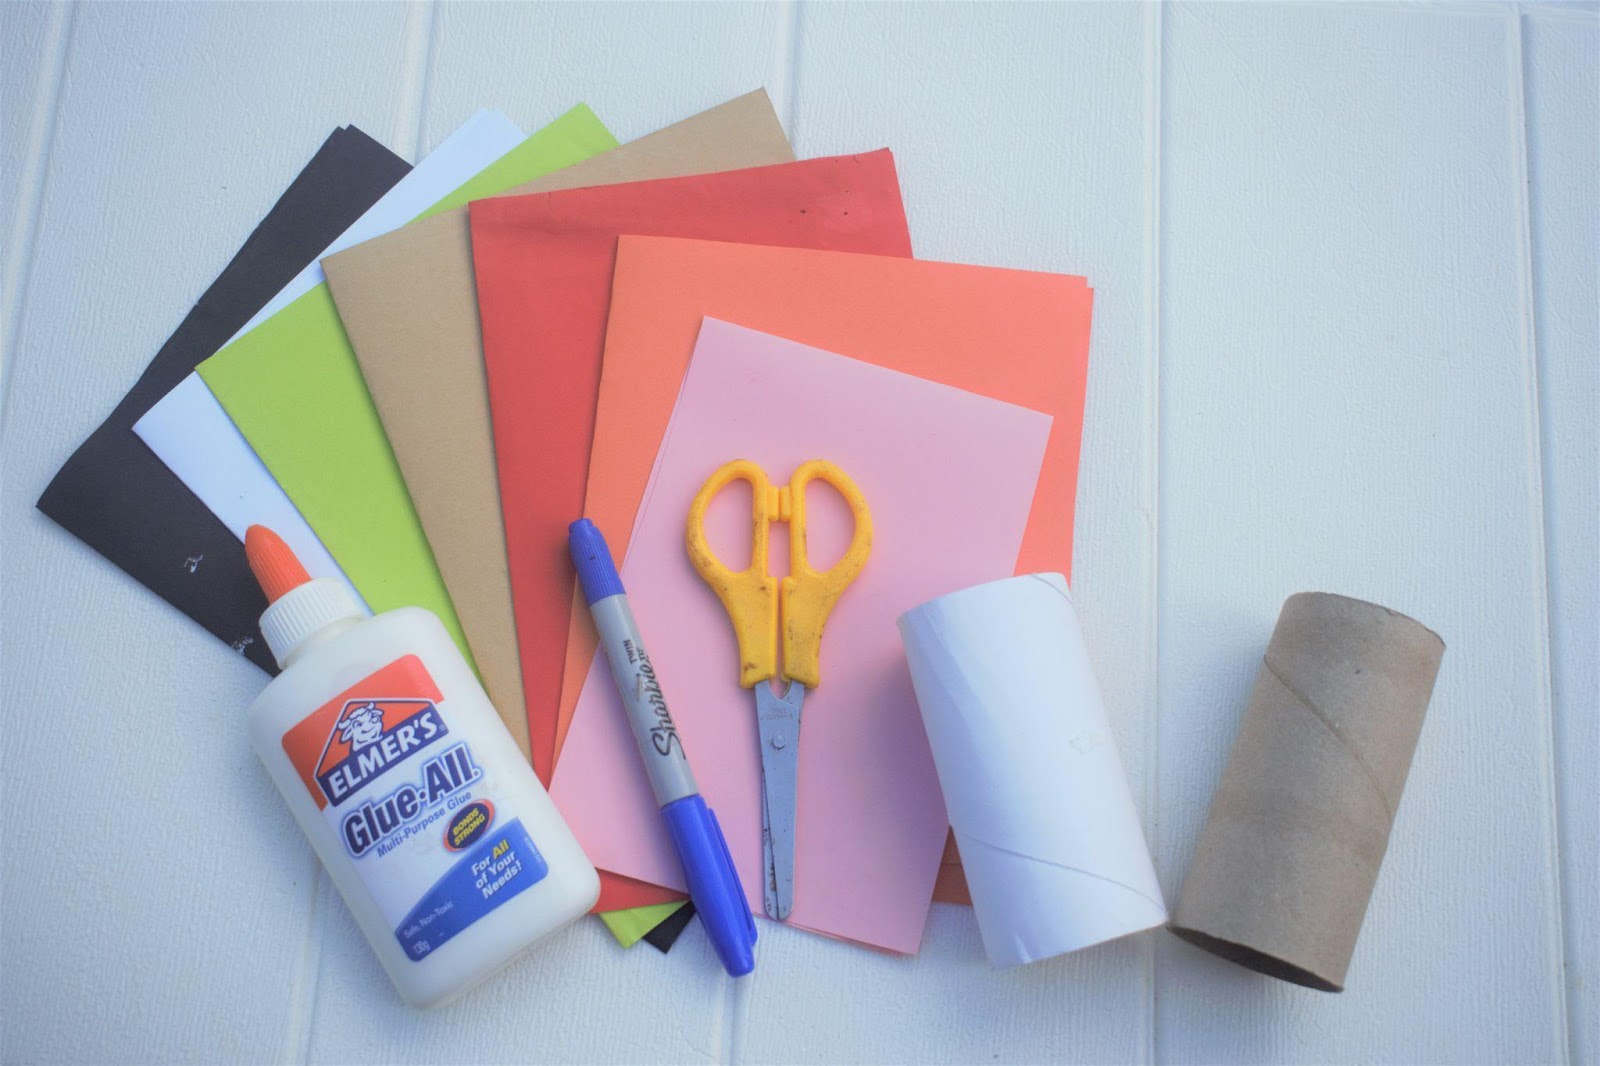 construction paper, toilet paper roll, glue, scissors, and marker